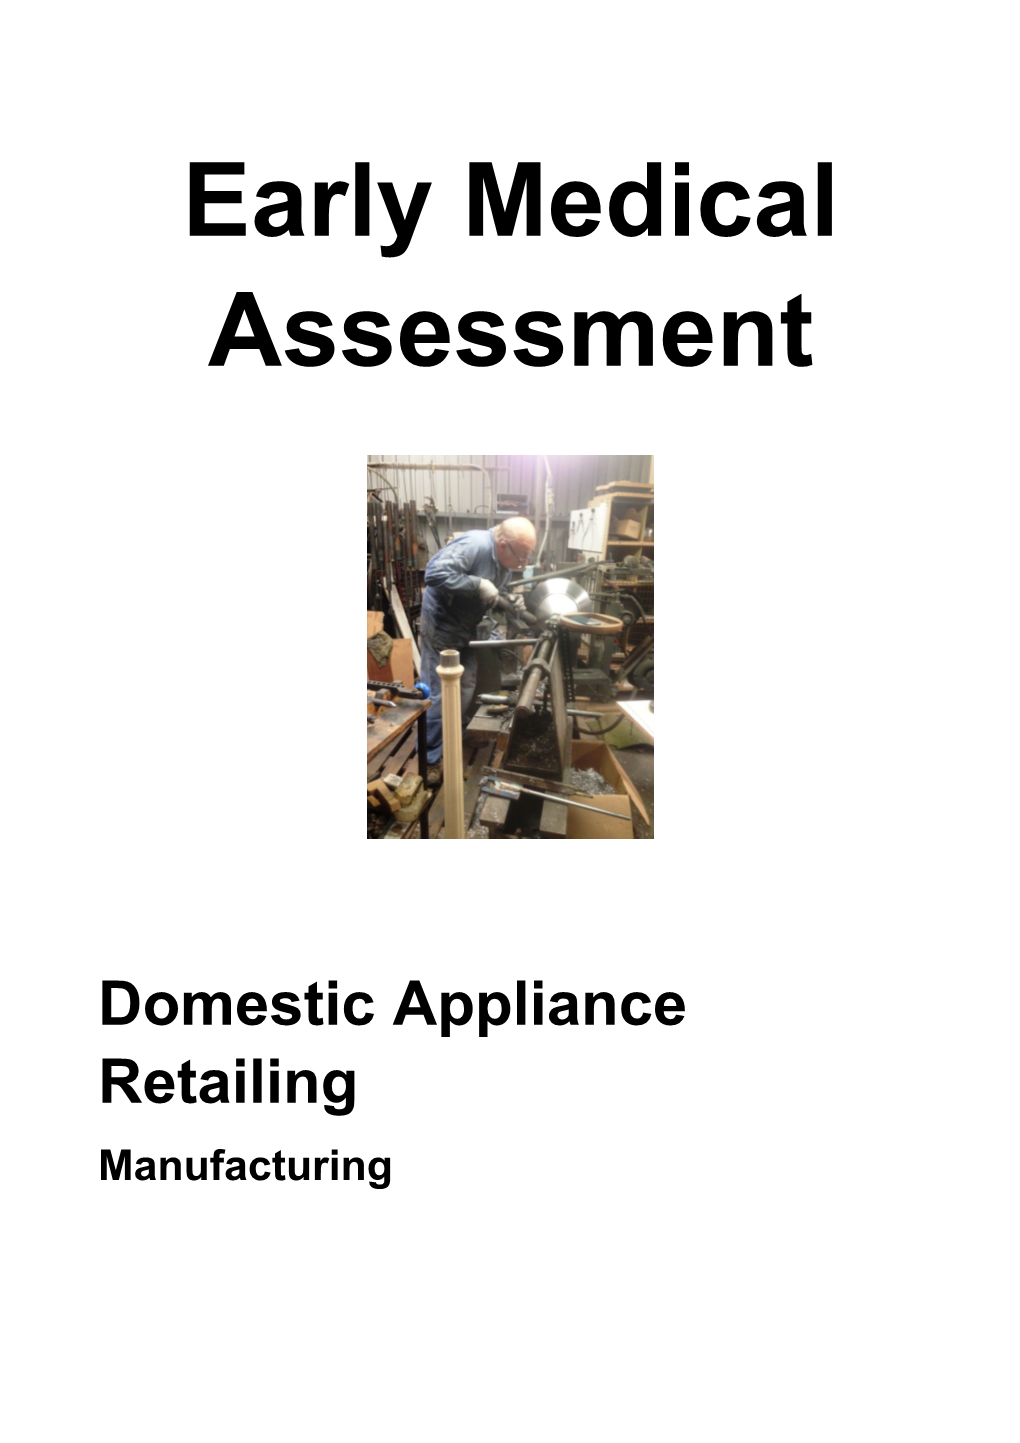 Domestic Appliance Retailing - Manufacturing